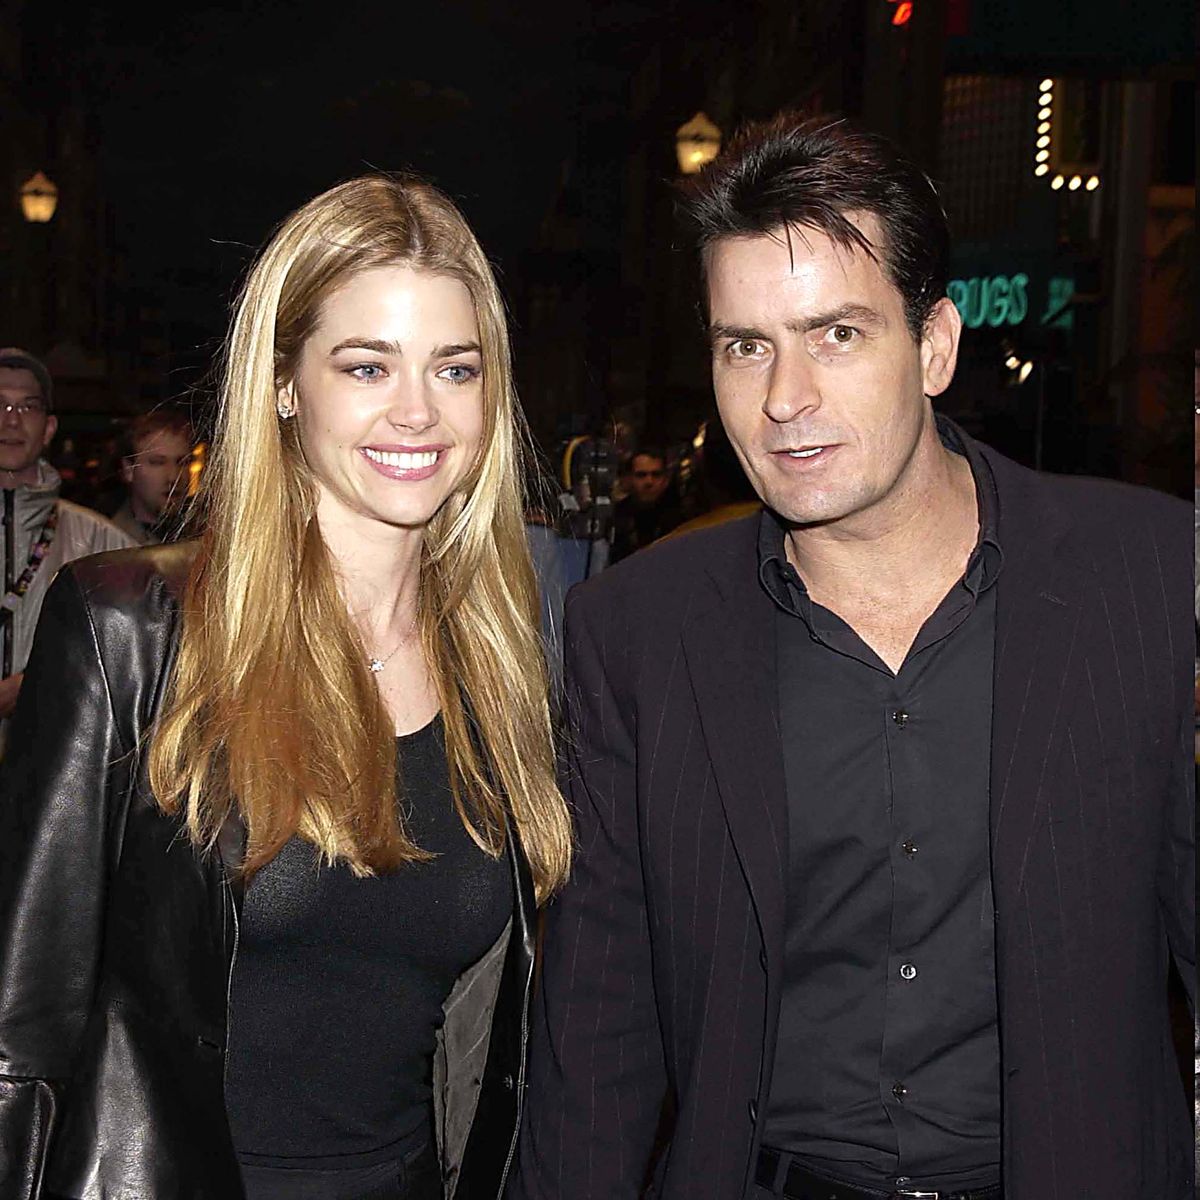 Charlie Sheen and Denise Richards from The Young and the Restless.